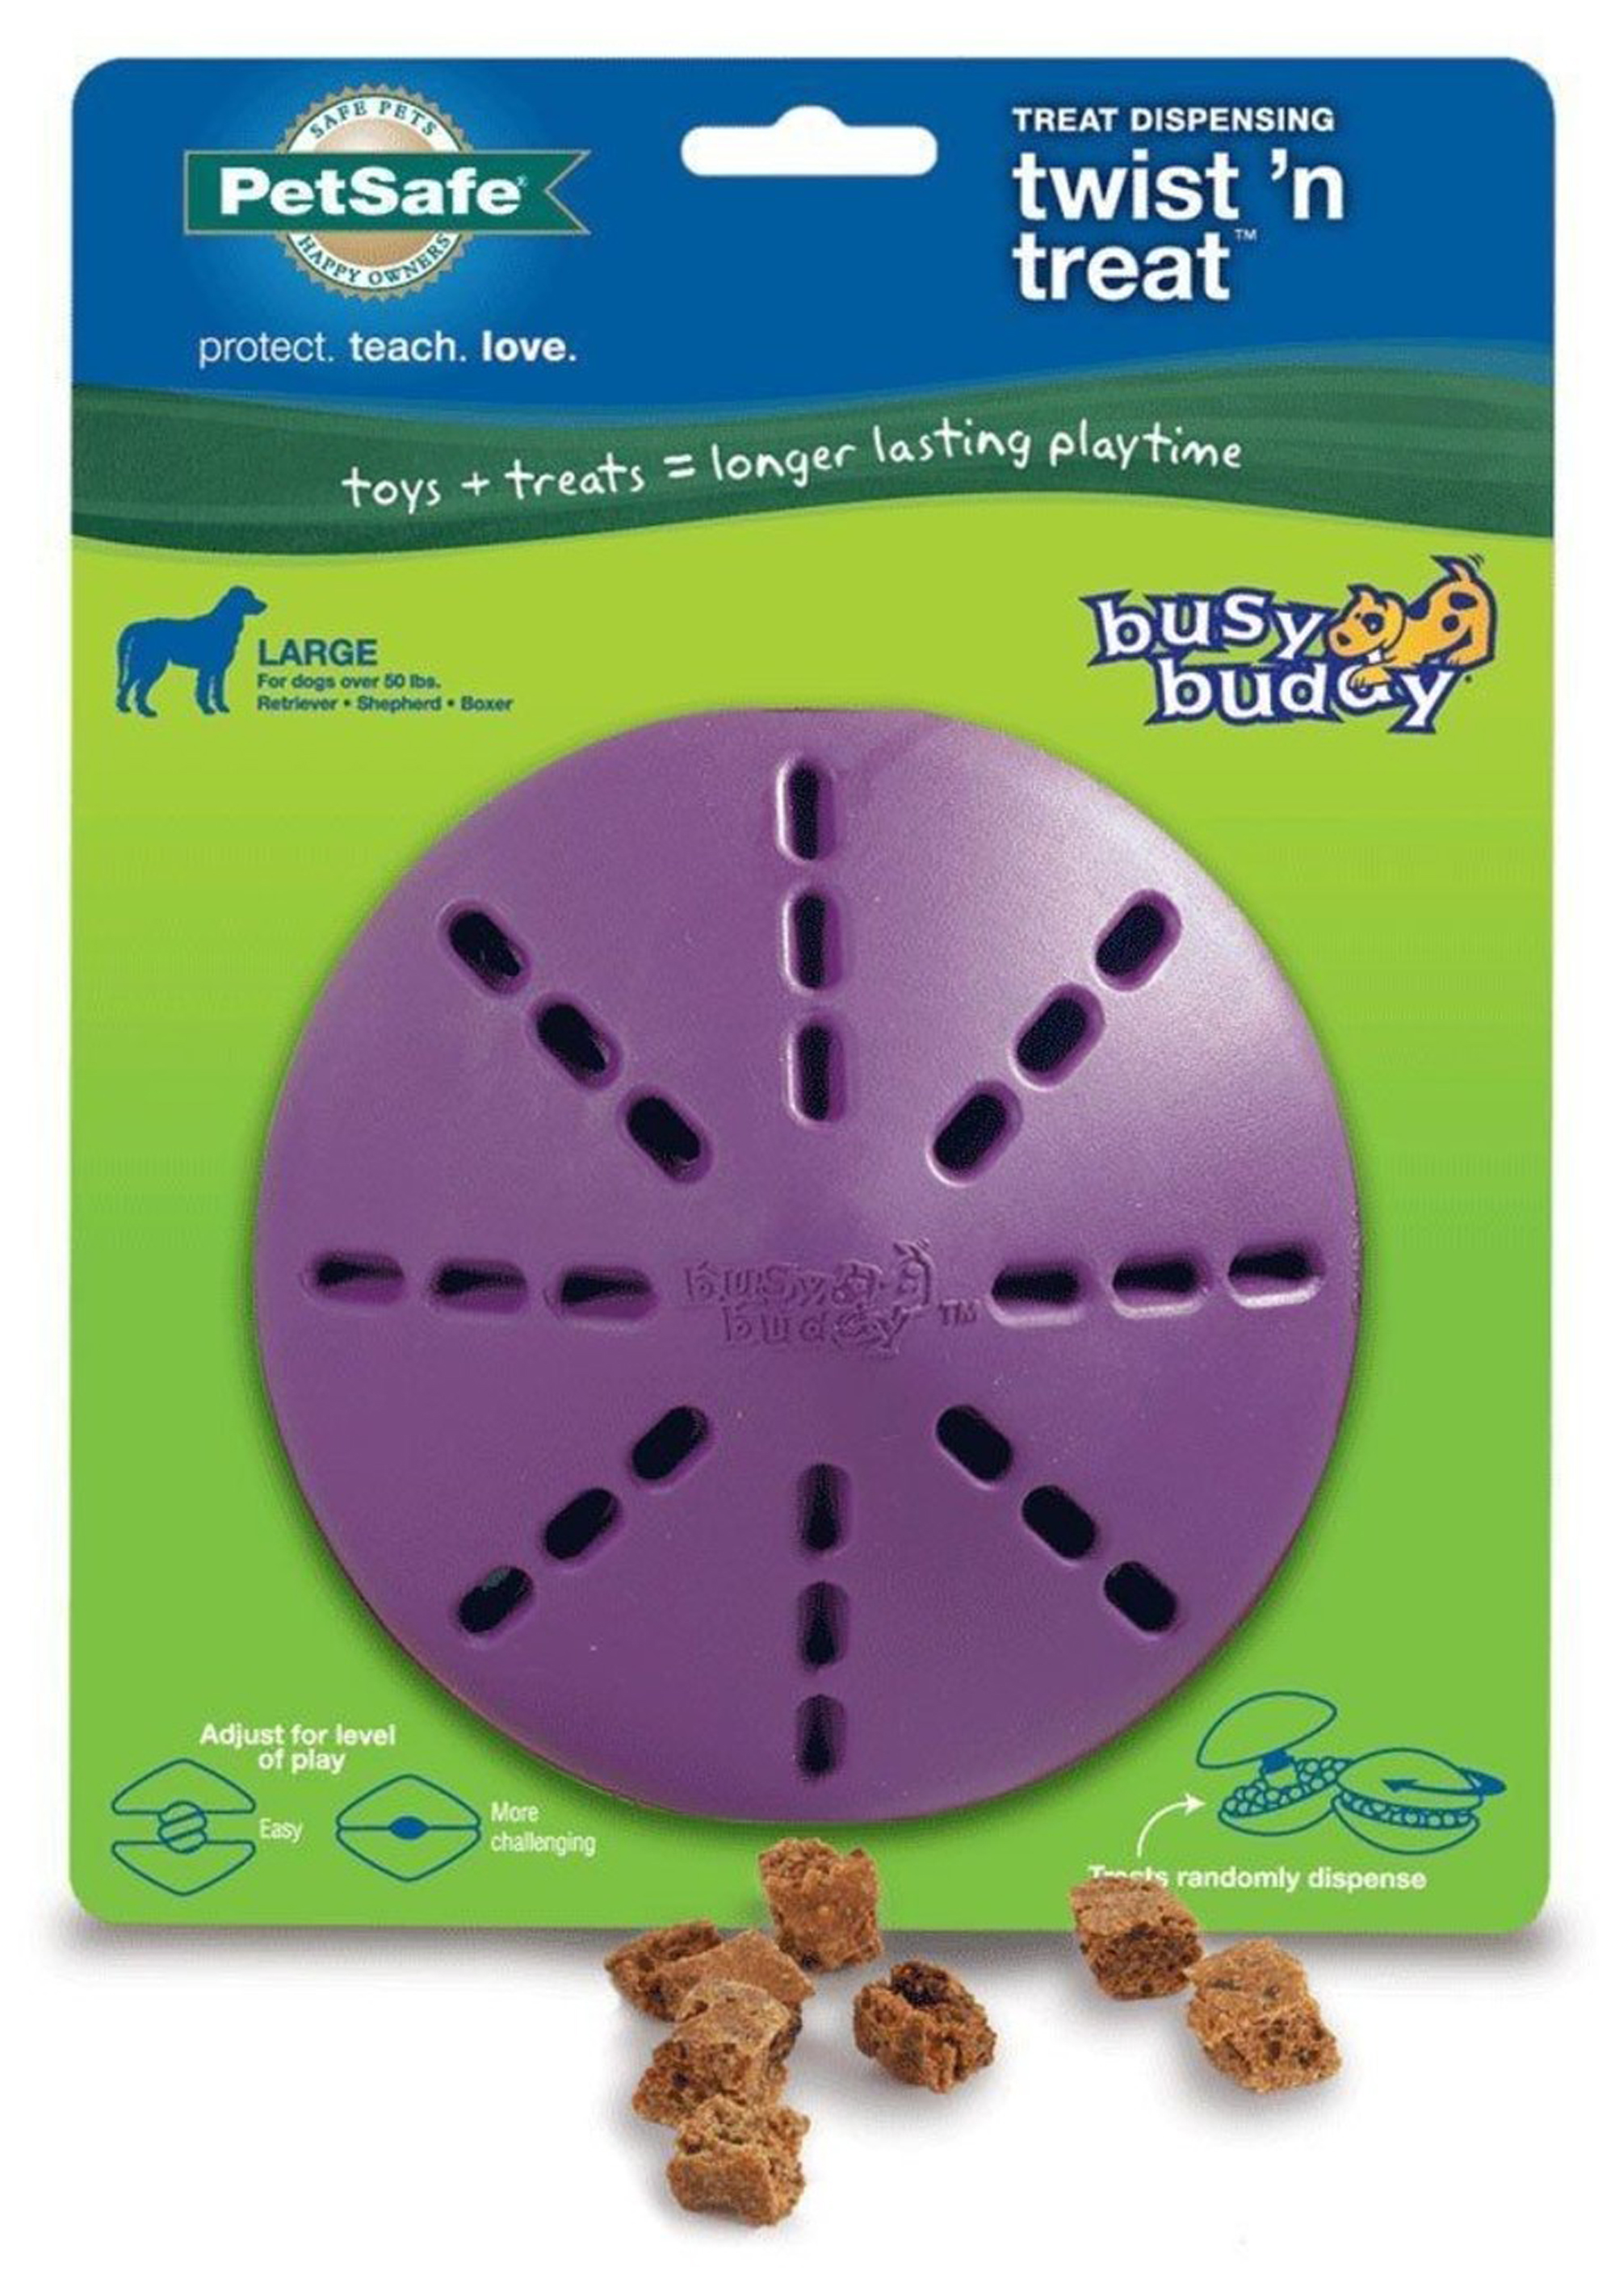 BUSY BUDDY KIBBLE NIBBLE FEEDER BALL - My Pet Store and More